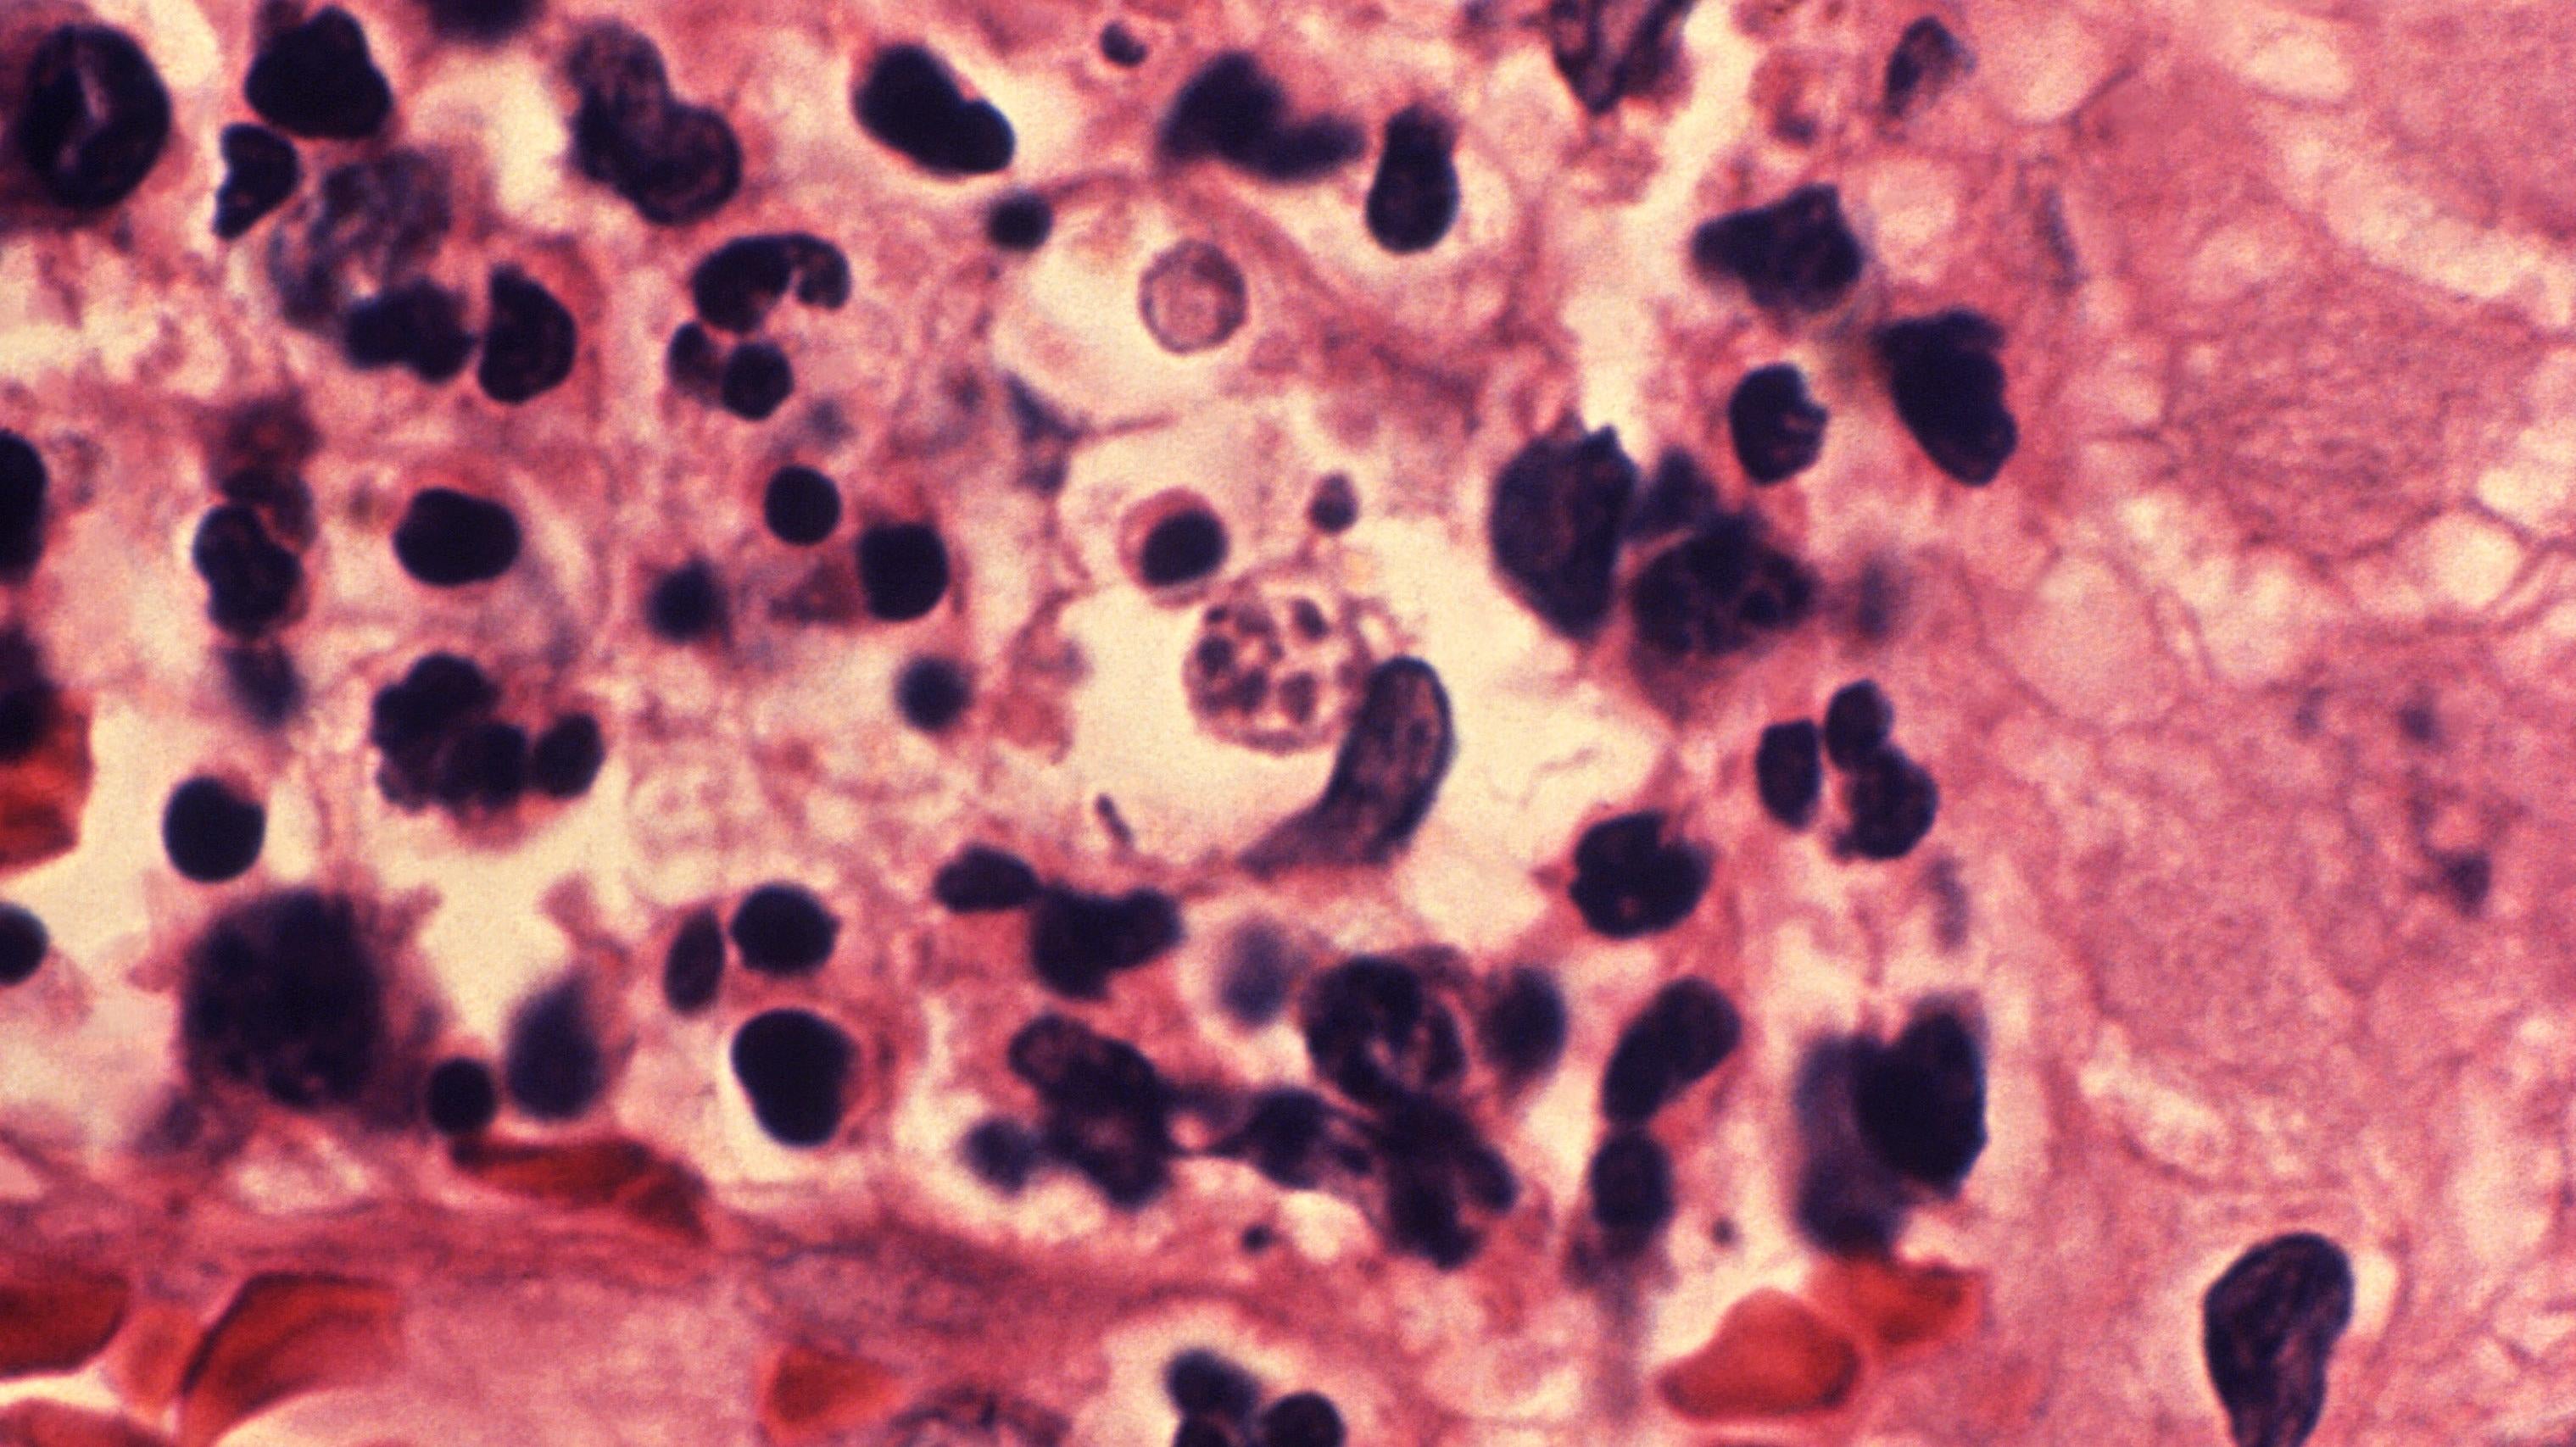 The bacteria that causes donovanosis are difficult to culture, but the infection leaves behind dark-coloured objects called donovan bodies, seen above, in the lesions it causes. (Image: CDC/ Dr. Cornelio Arevalo, Venezuela)